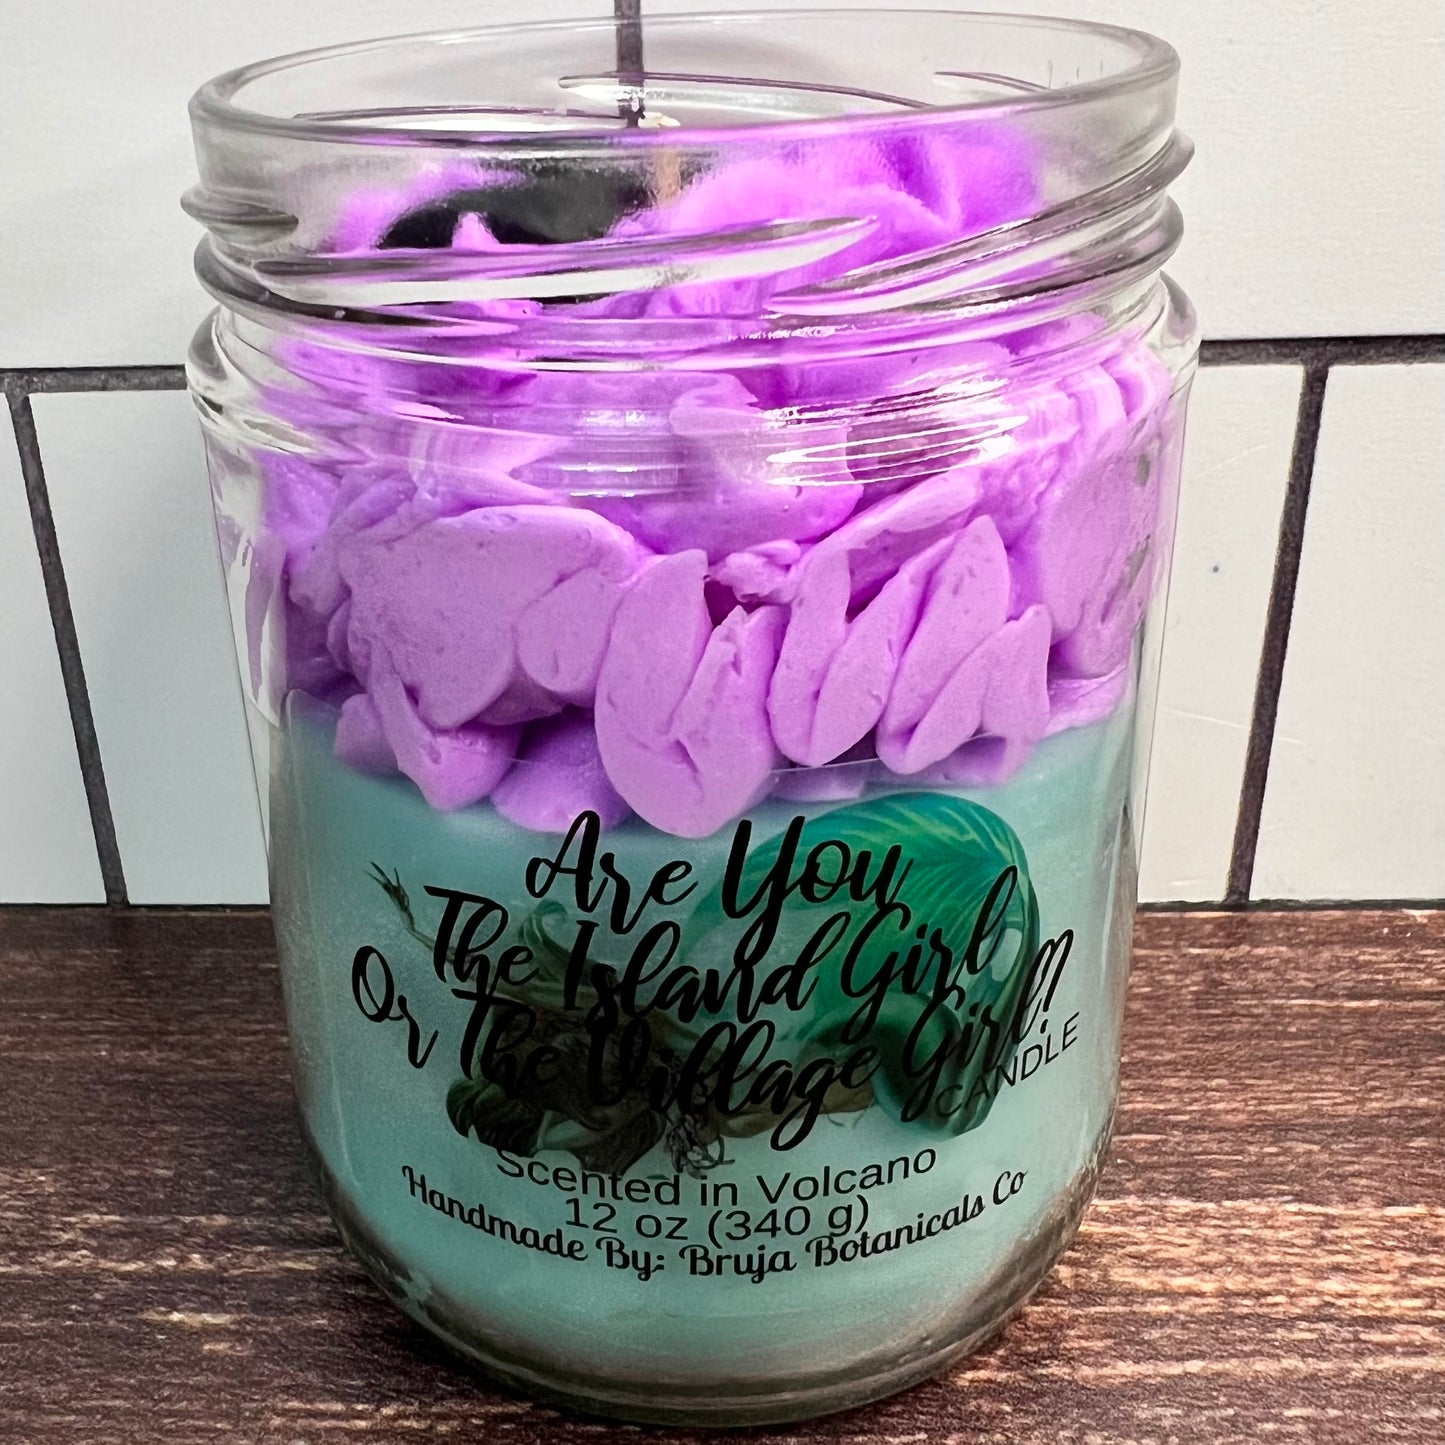 Are You The Island Girl Or The Village Girl Whipped Candle (TVD inspired)